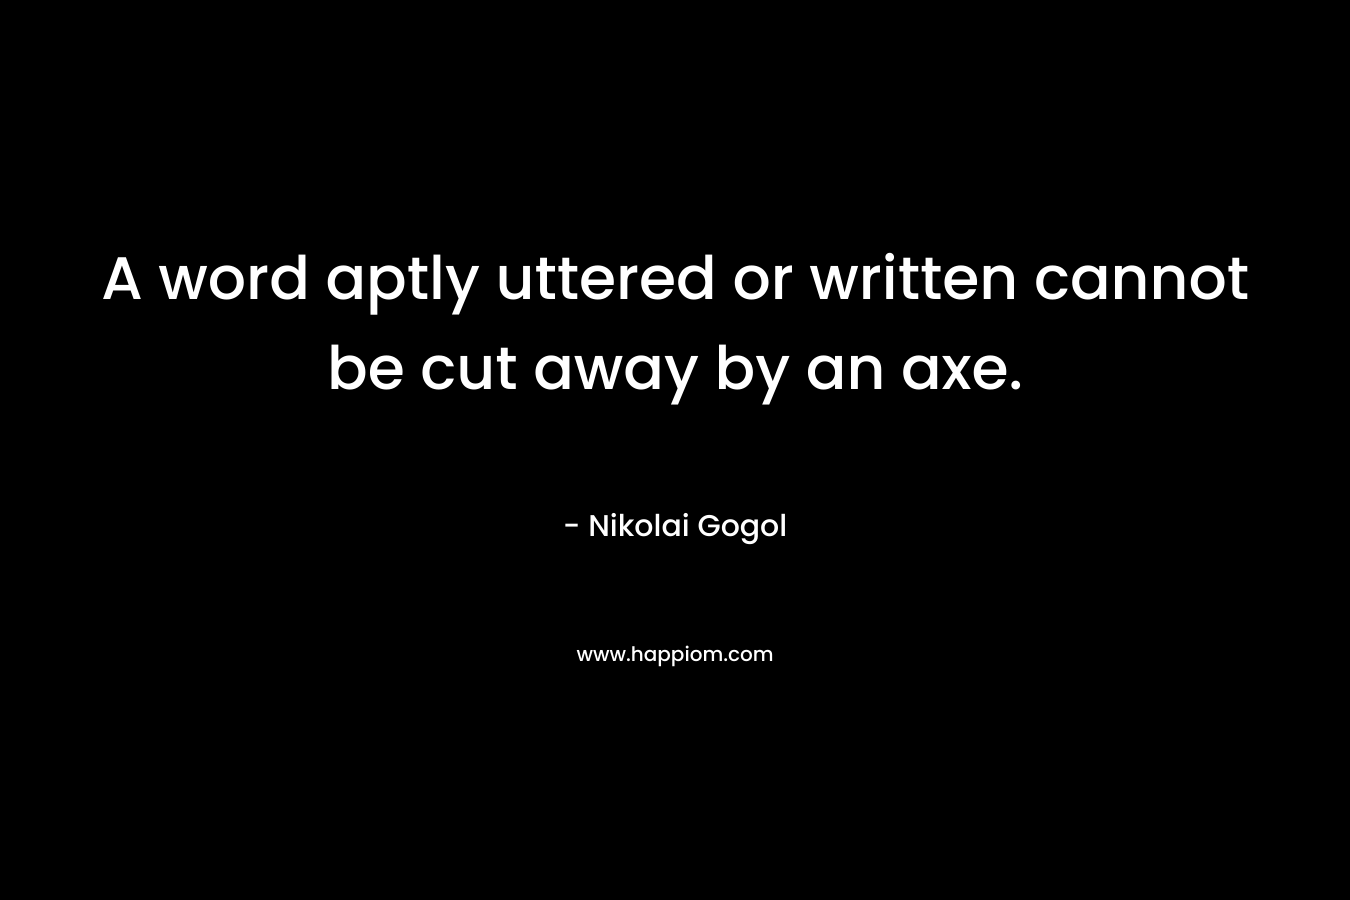 A word aptly uttered or written cannot be cut away by an axe. – Nikolai Gogol